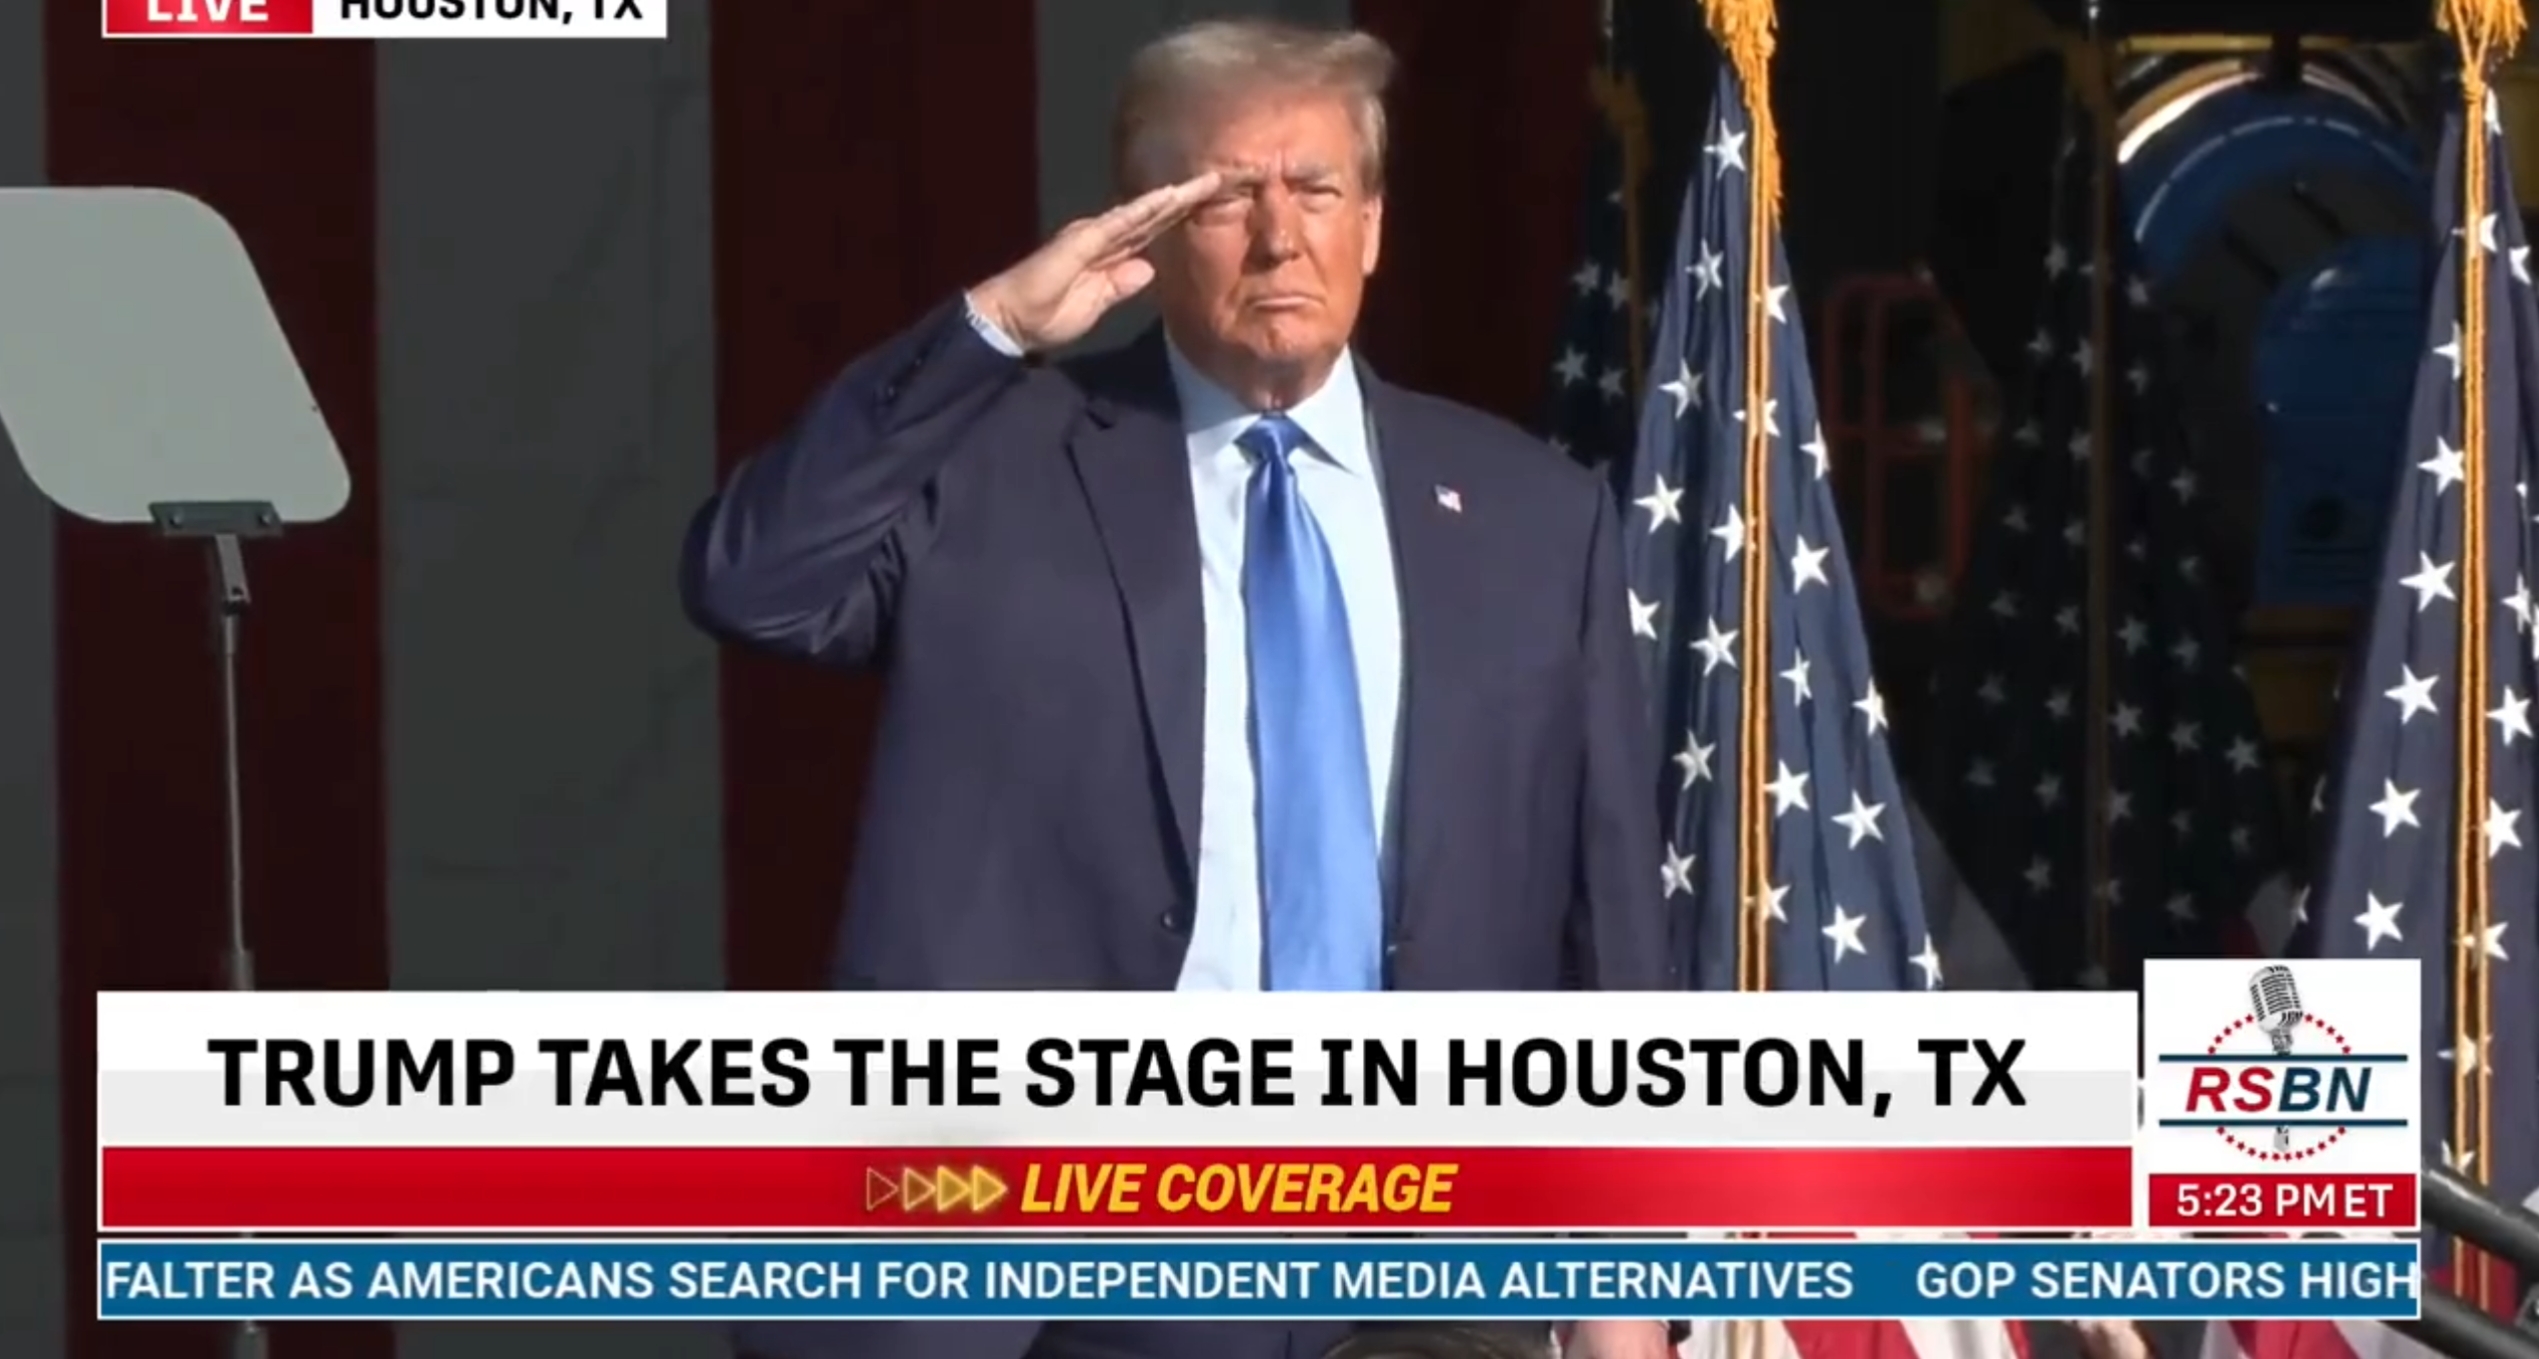 Trump Refers to Jan. 6 Rioters as ‘Hostages’ at Texas Rally (mediaite.com)